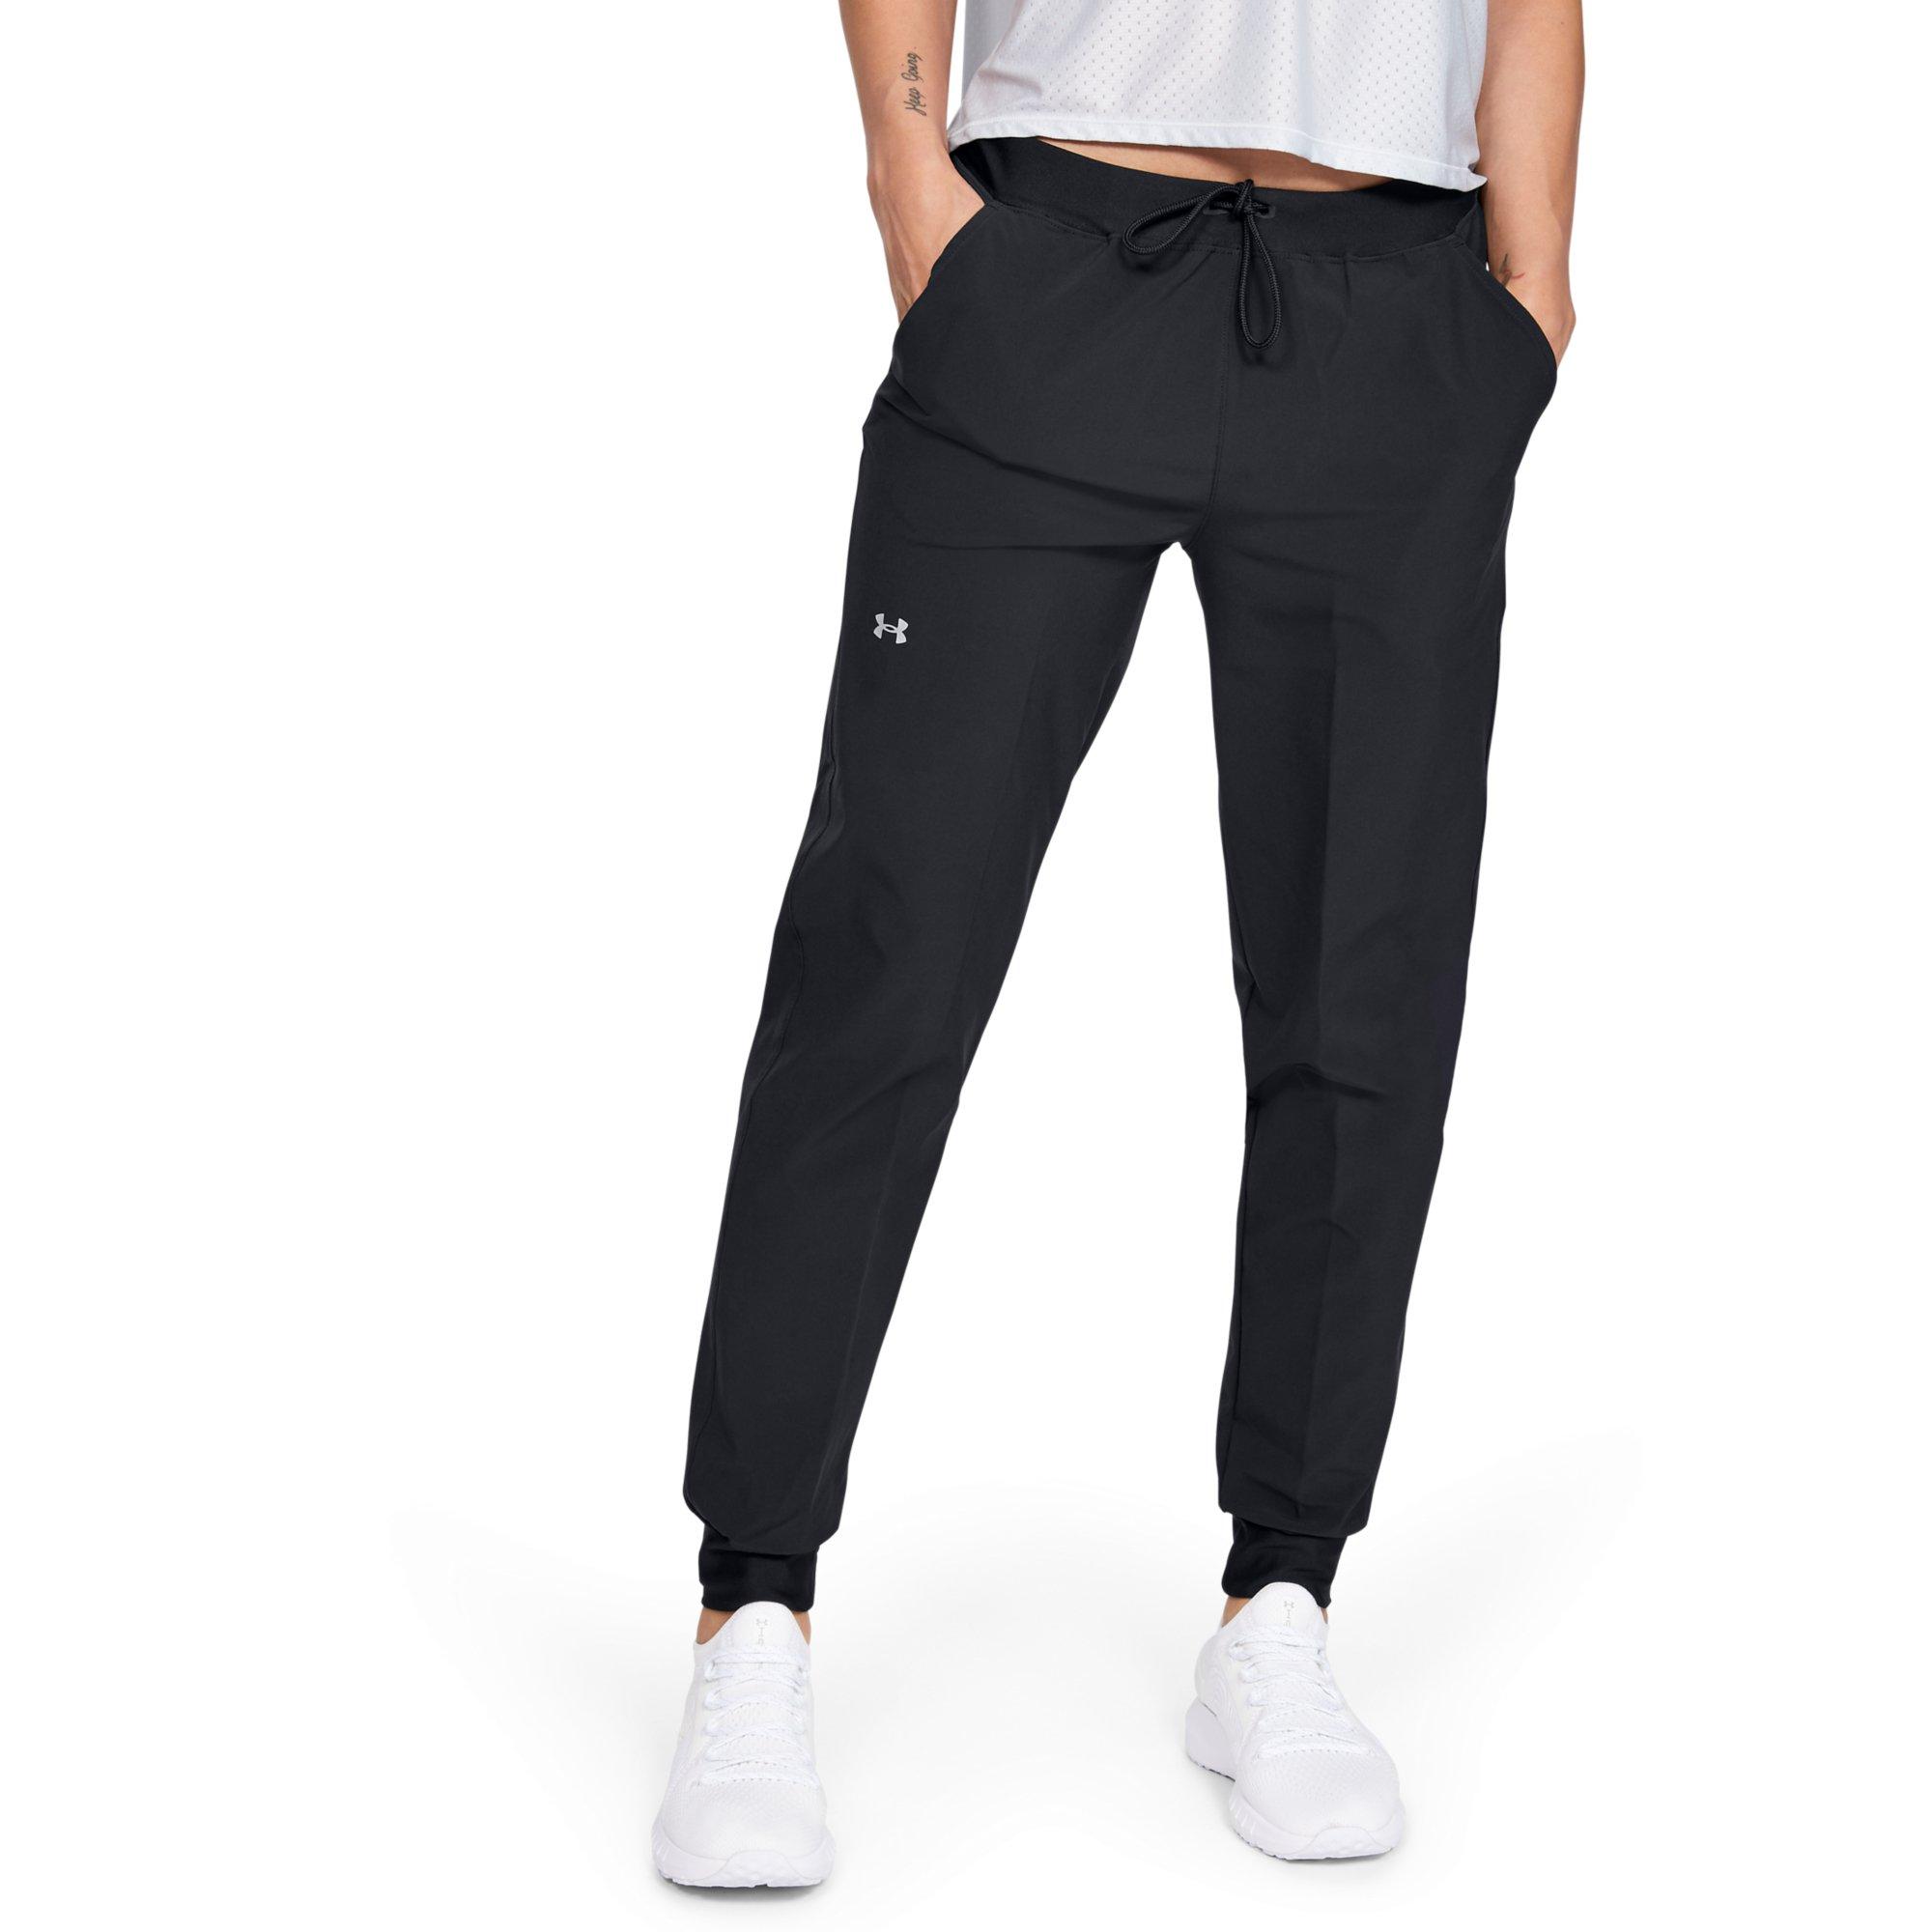  Under Armour Women's Armoursport Woven Pants, (001) Black / /  White, X-Small : Clothing, Shoes & Jewelry